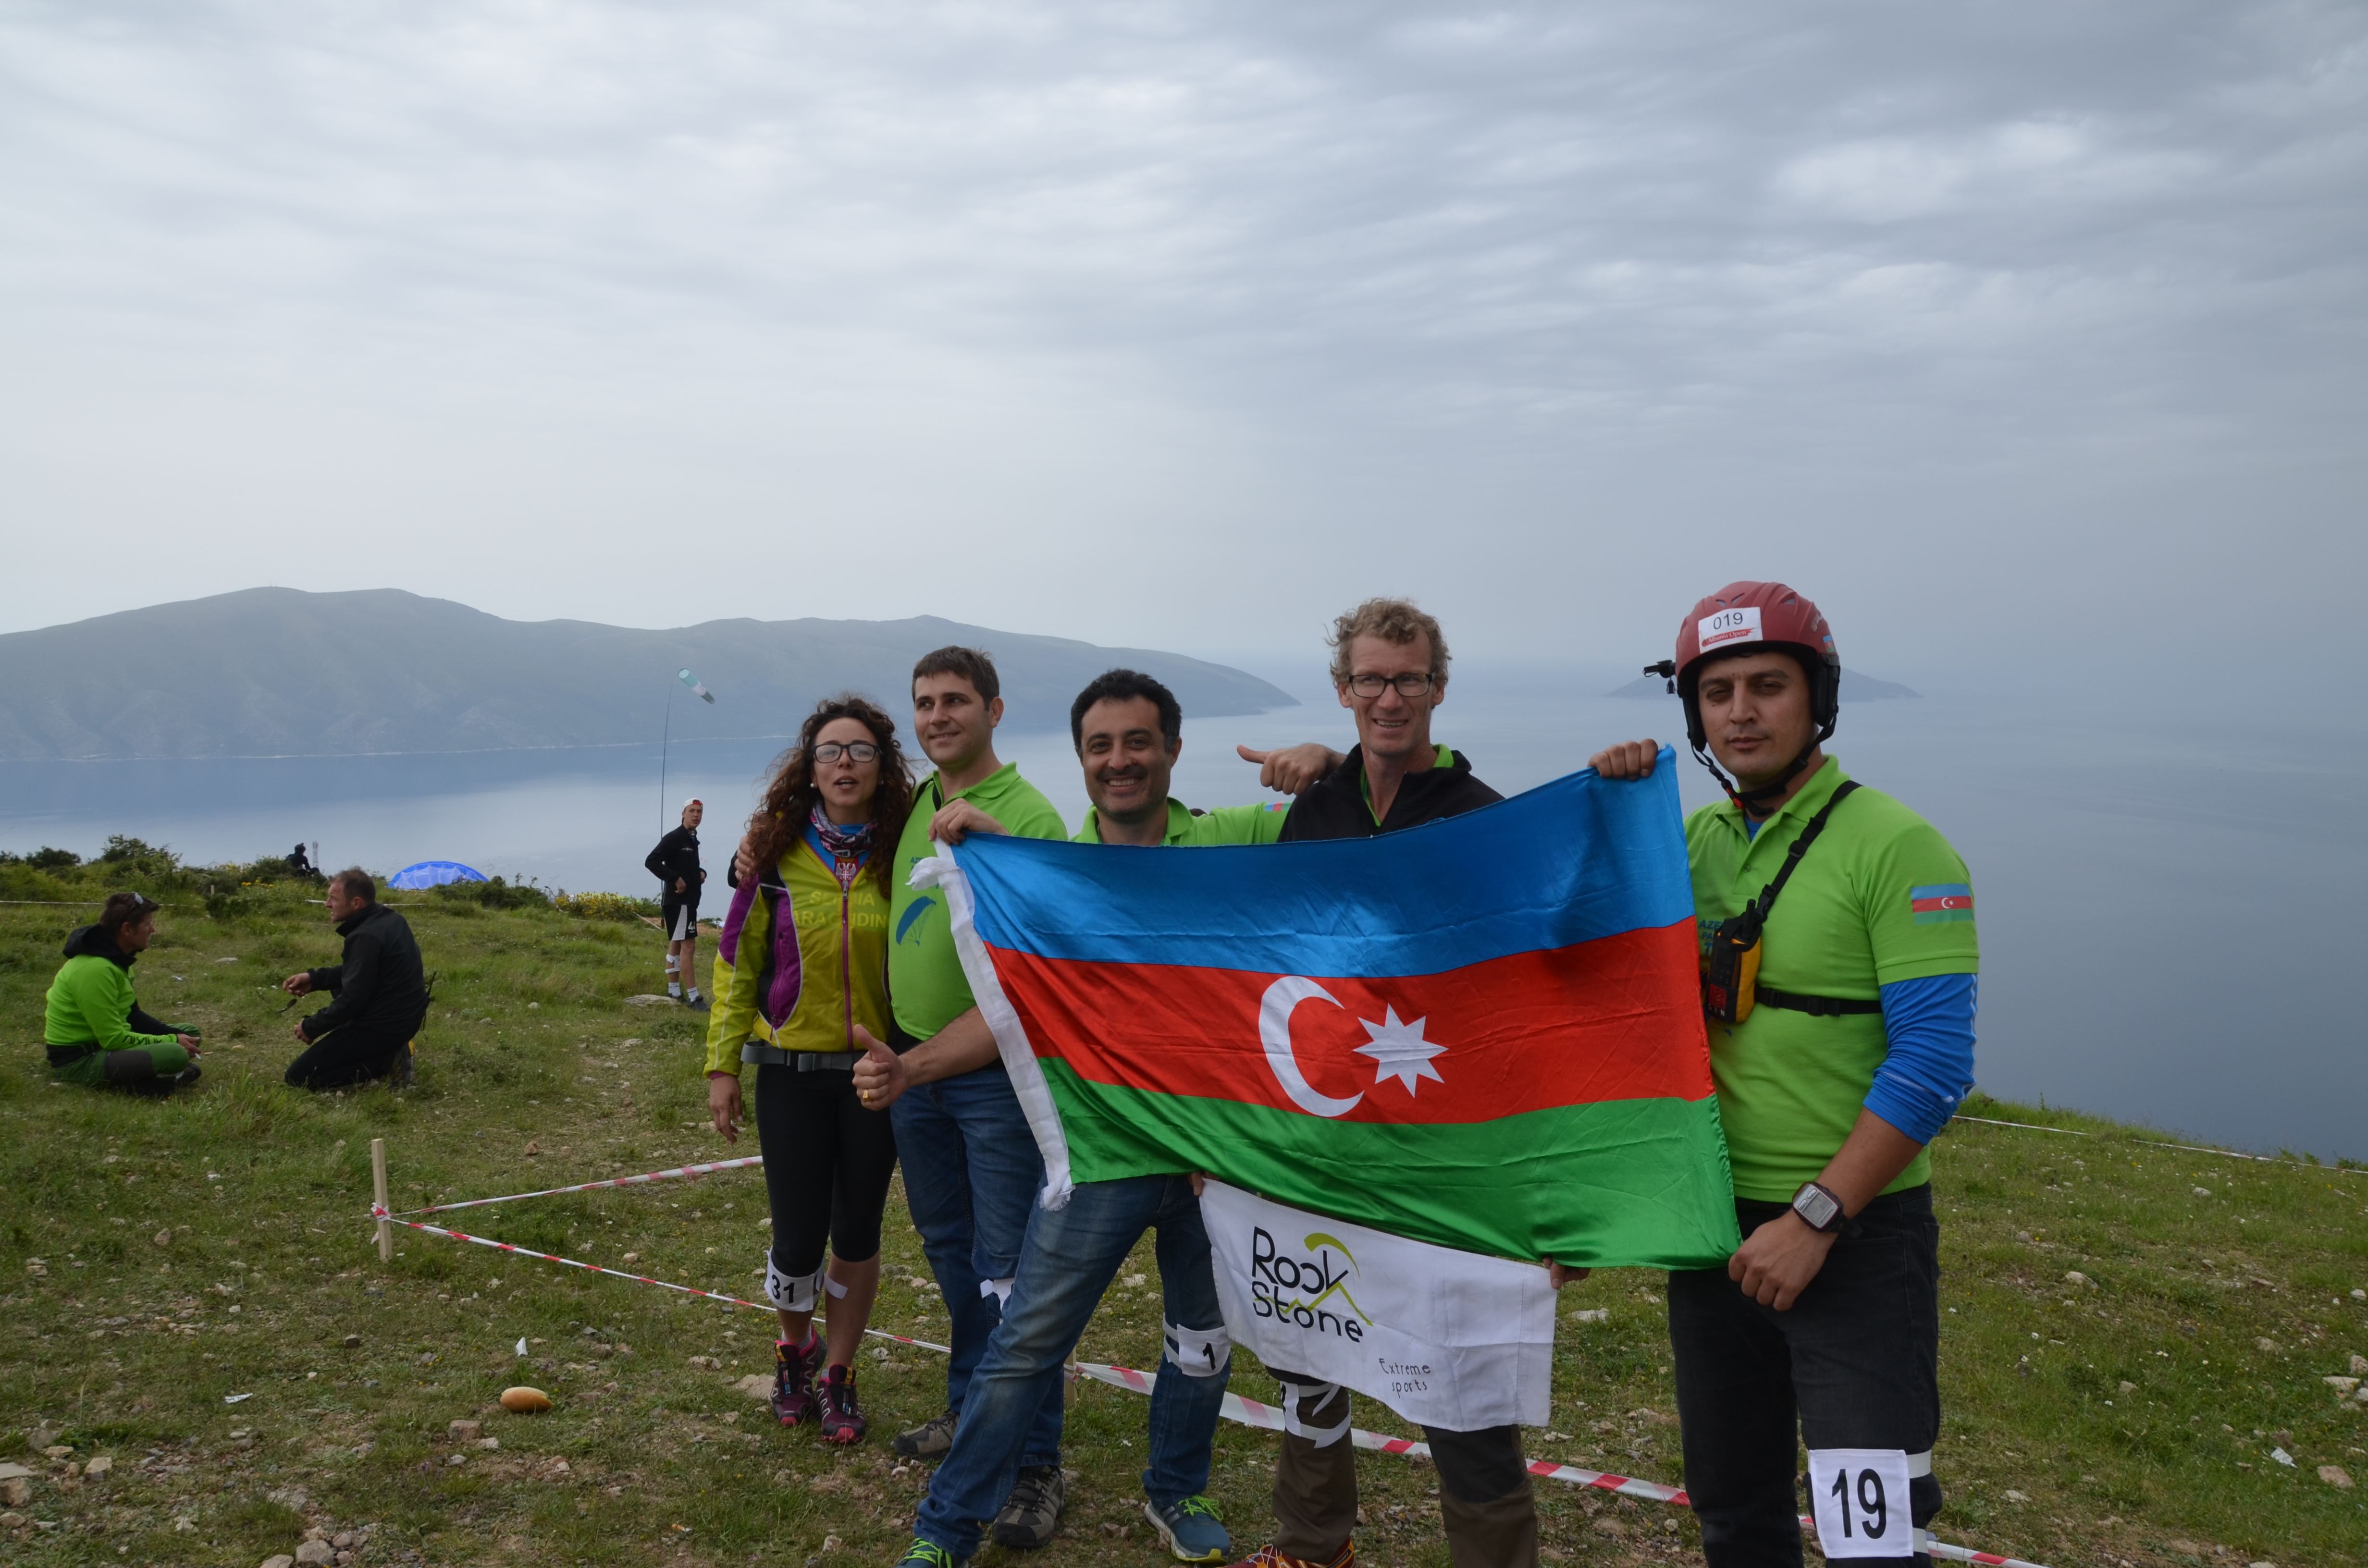 National paragliding pilots succeed in international arena